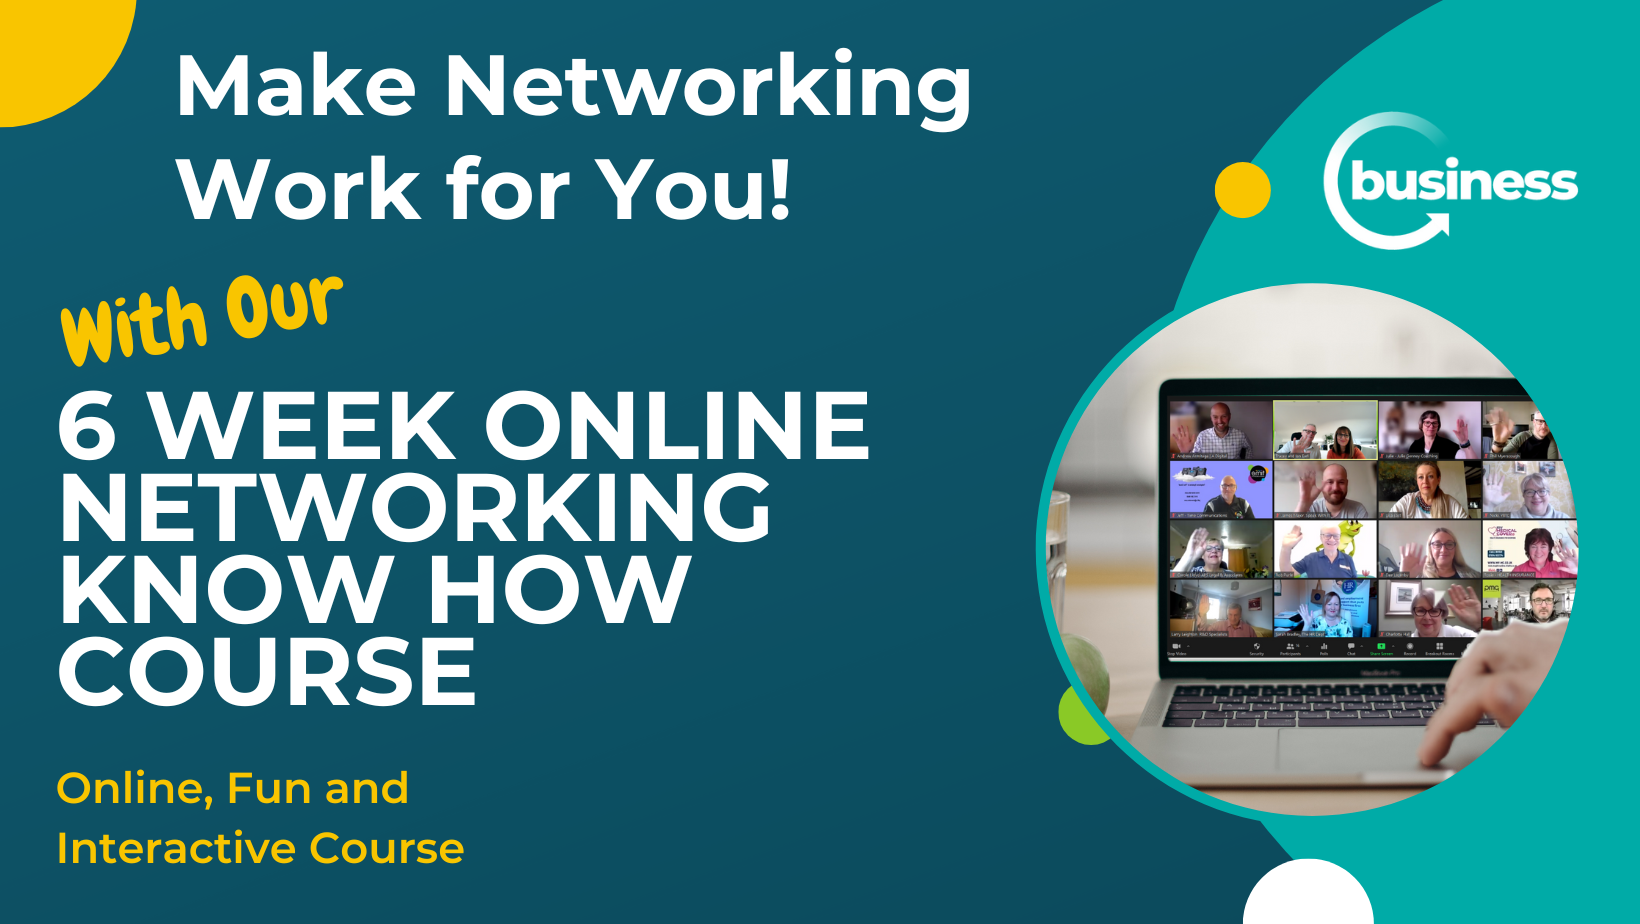 Group Online Interactive Course